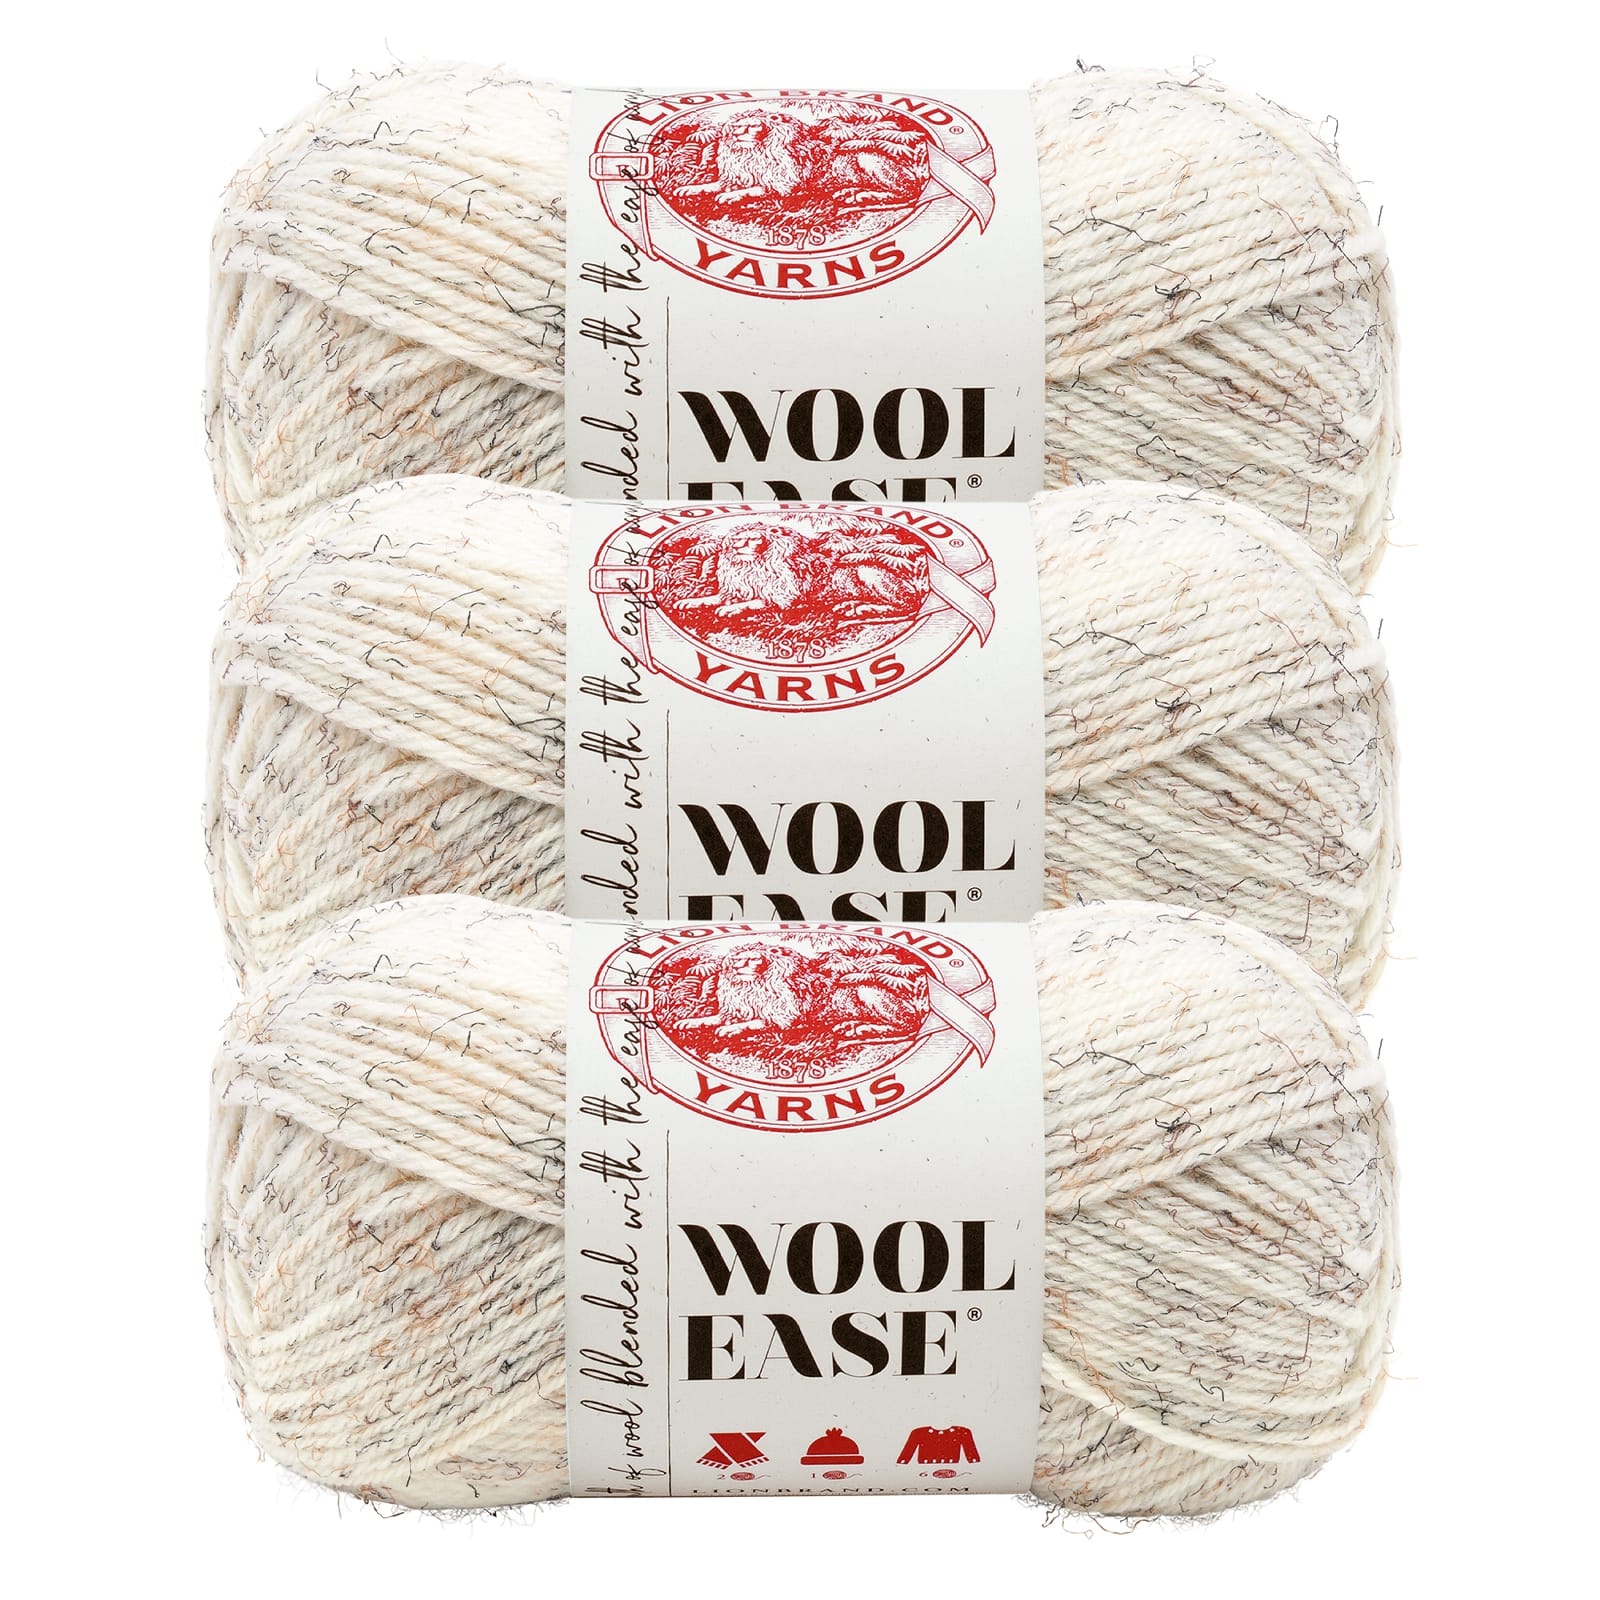 Wool-Ease Worsted Wool Lion Brand Yarn 1 Skein Knit Crochet Ranch